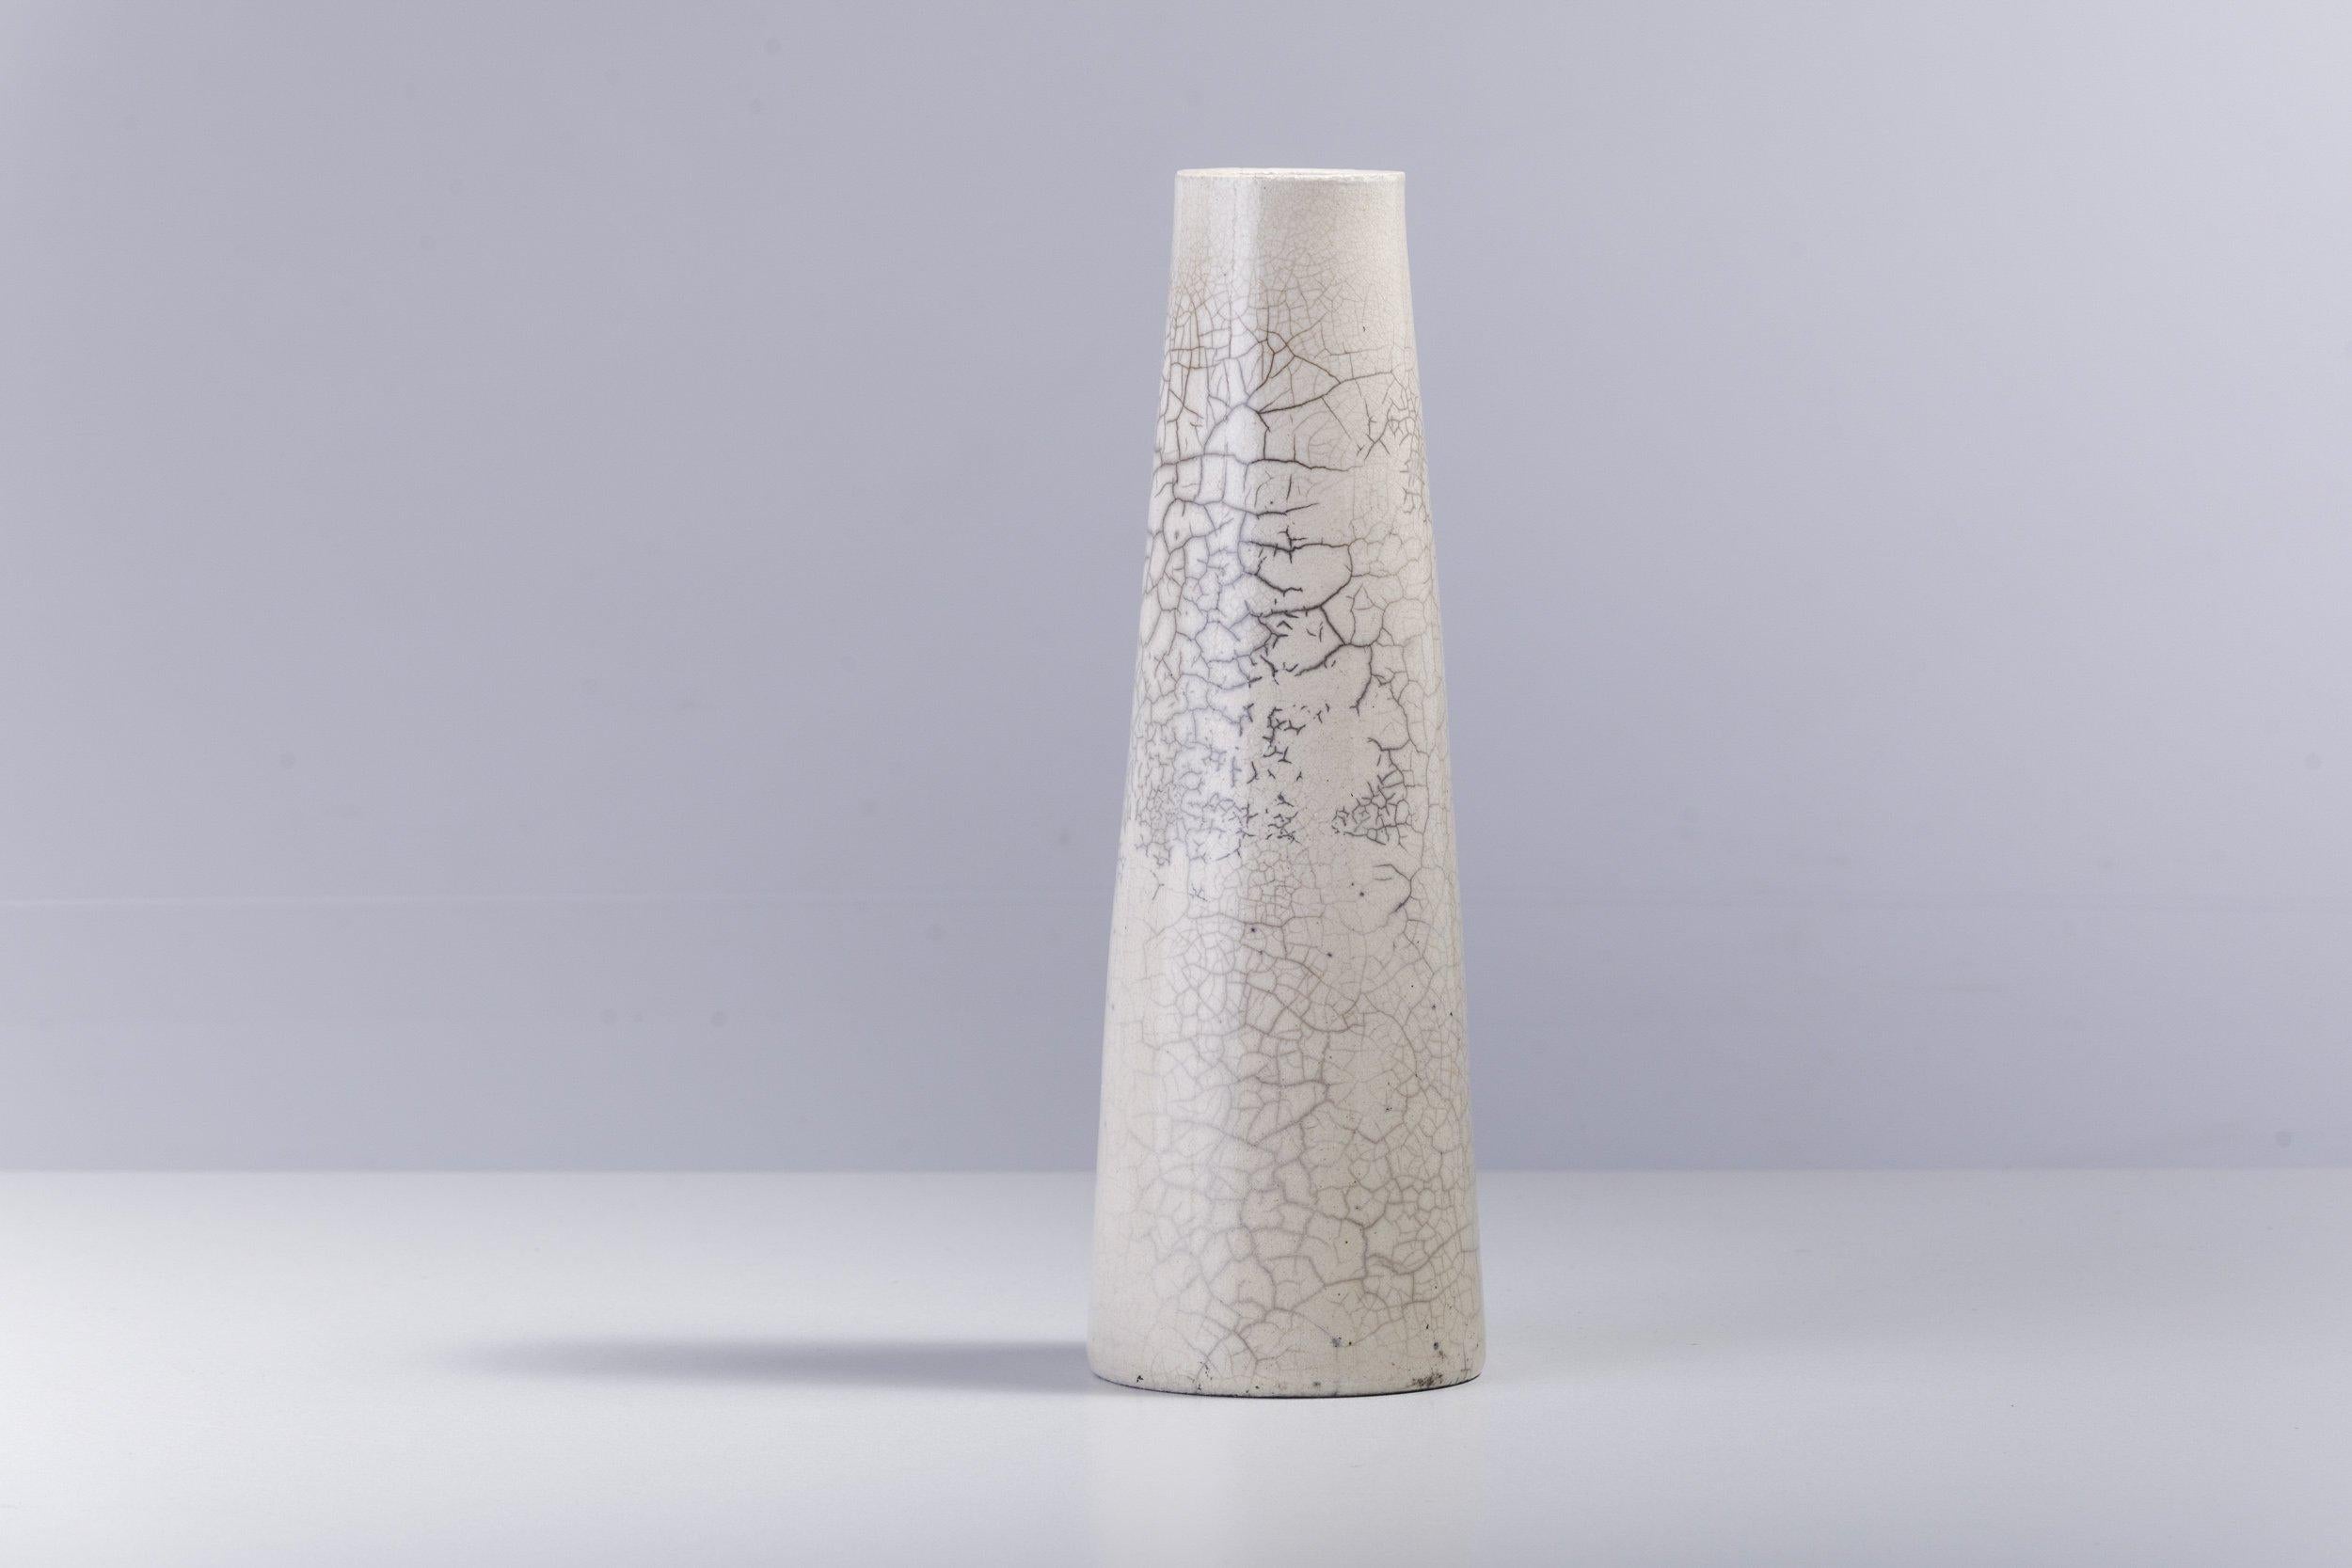 Hana vertical L

The perfect, stylish addition to any interior setting, this extraordinary vase is entirely handcrafted of ceramic following the ancient Raku technique of Japanese origins. The naturally colored, sleek surface of this artwork is